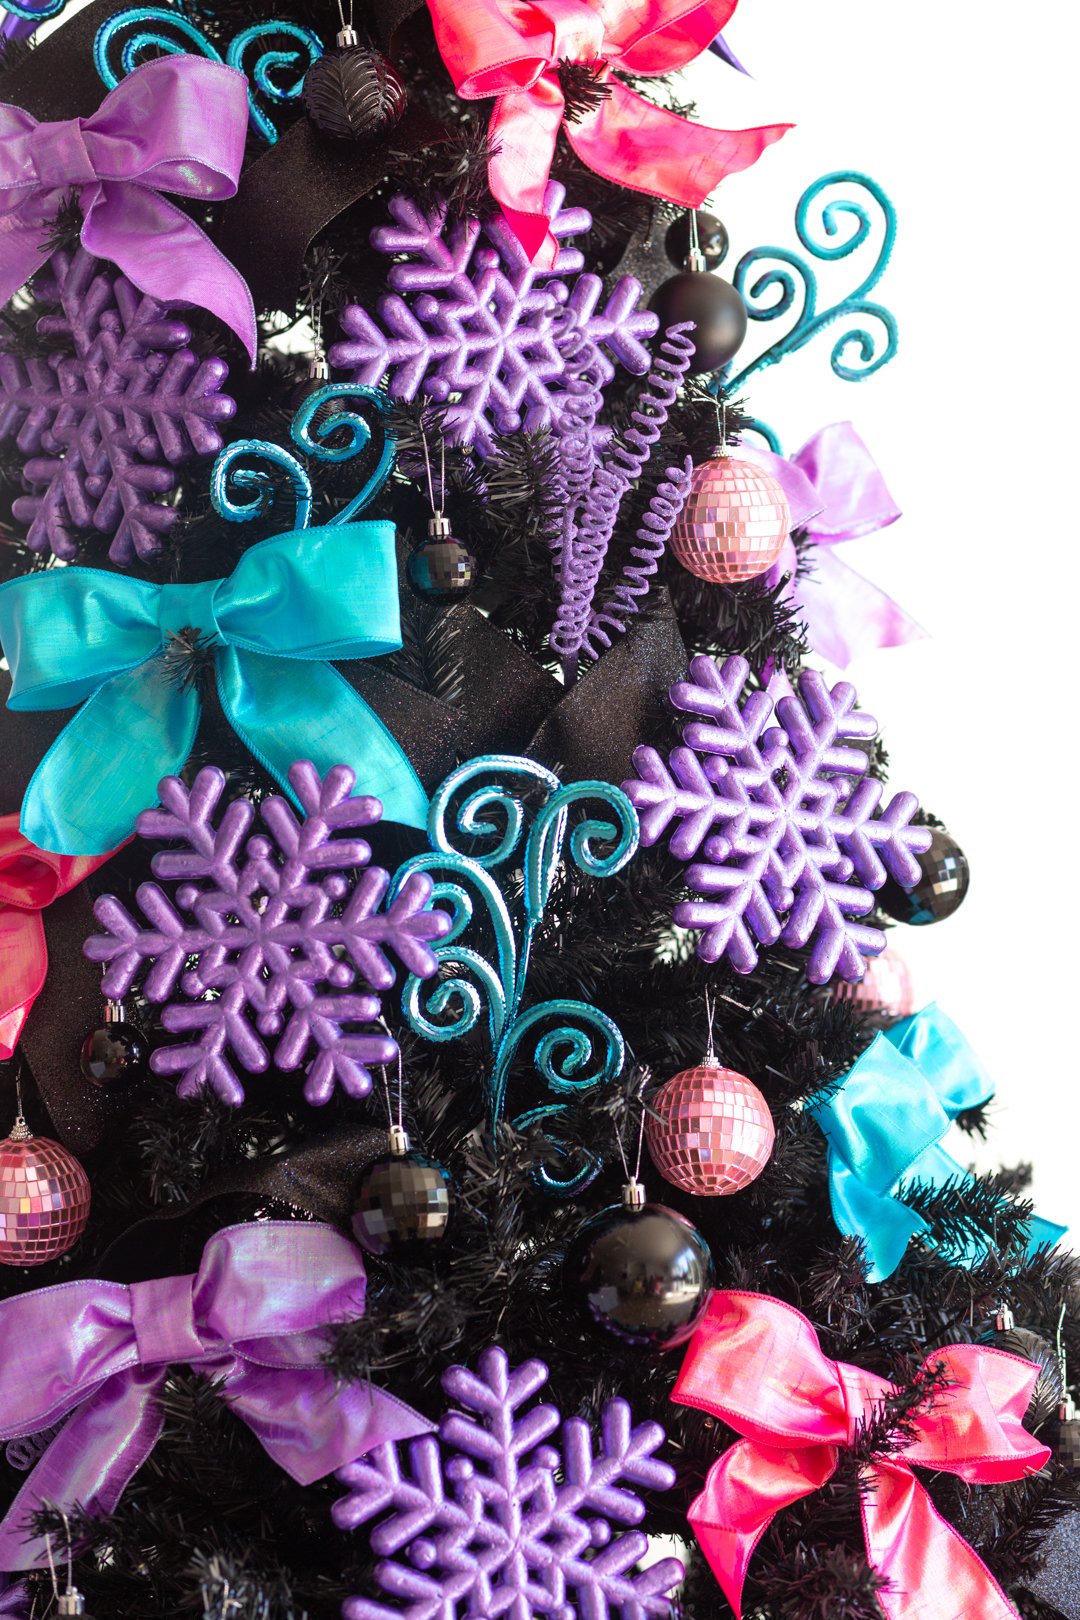 up close view of the center of a black christmas tree to showcase the metallic purple snowflake ornaments, swirly blue floral picks and jumbo zied purple and blue bows.